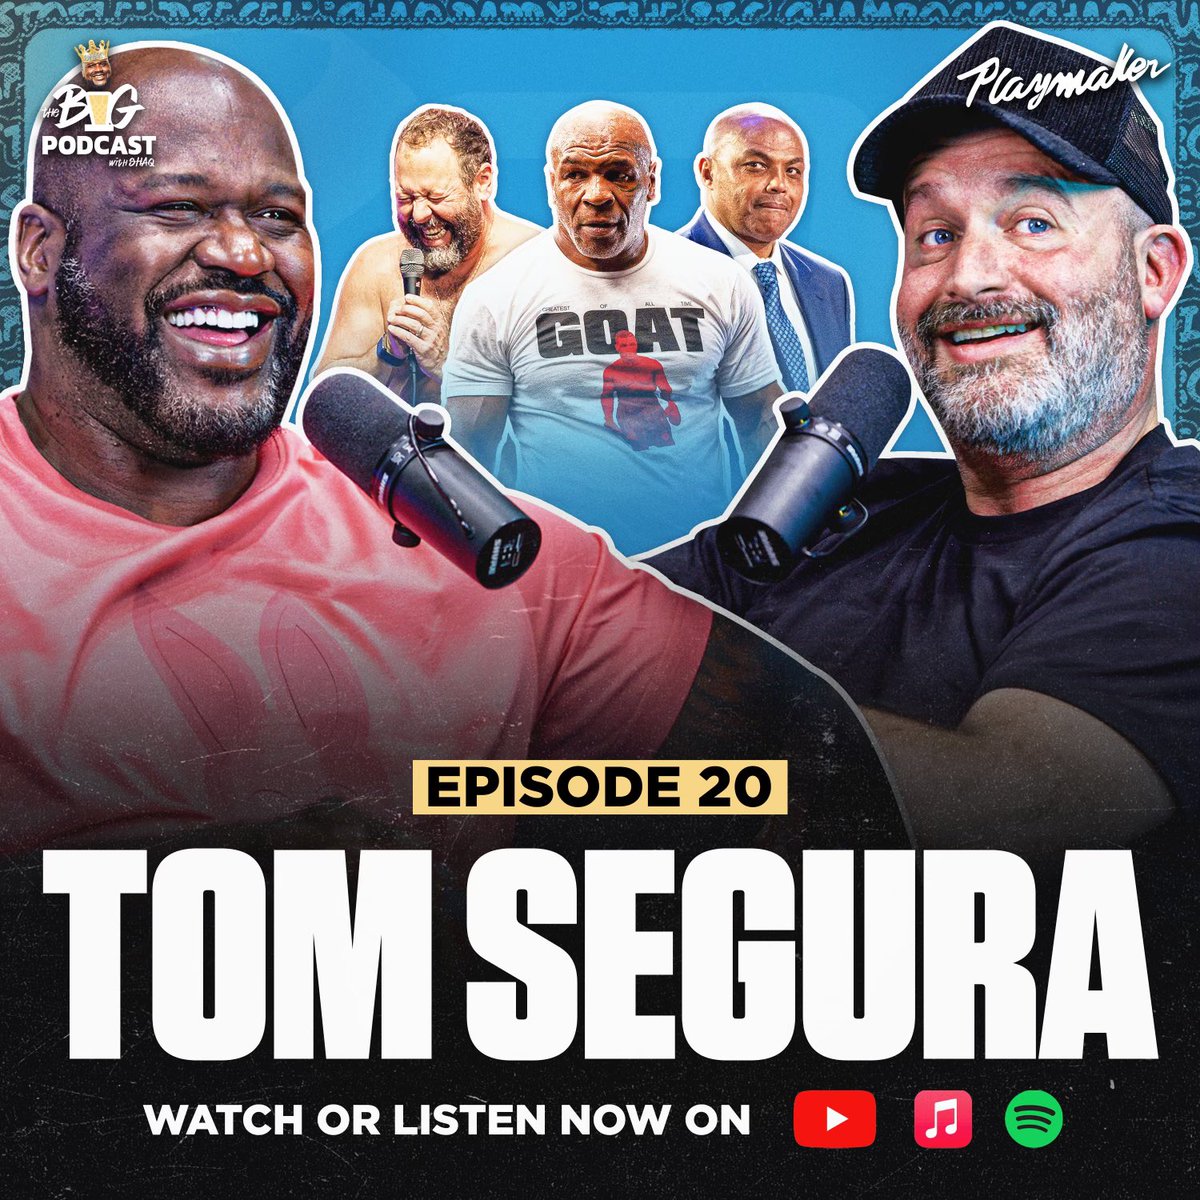 NEW EPISODE 🚨 Tom Segura had Shaq in tears talking about Charles Barkley, Aliens & Mike Tyson. Watch episode 20 here: tapthe.link/BigPodEp20